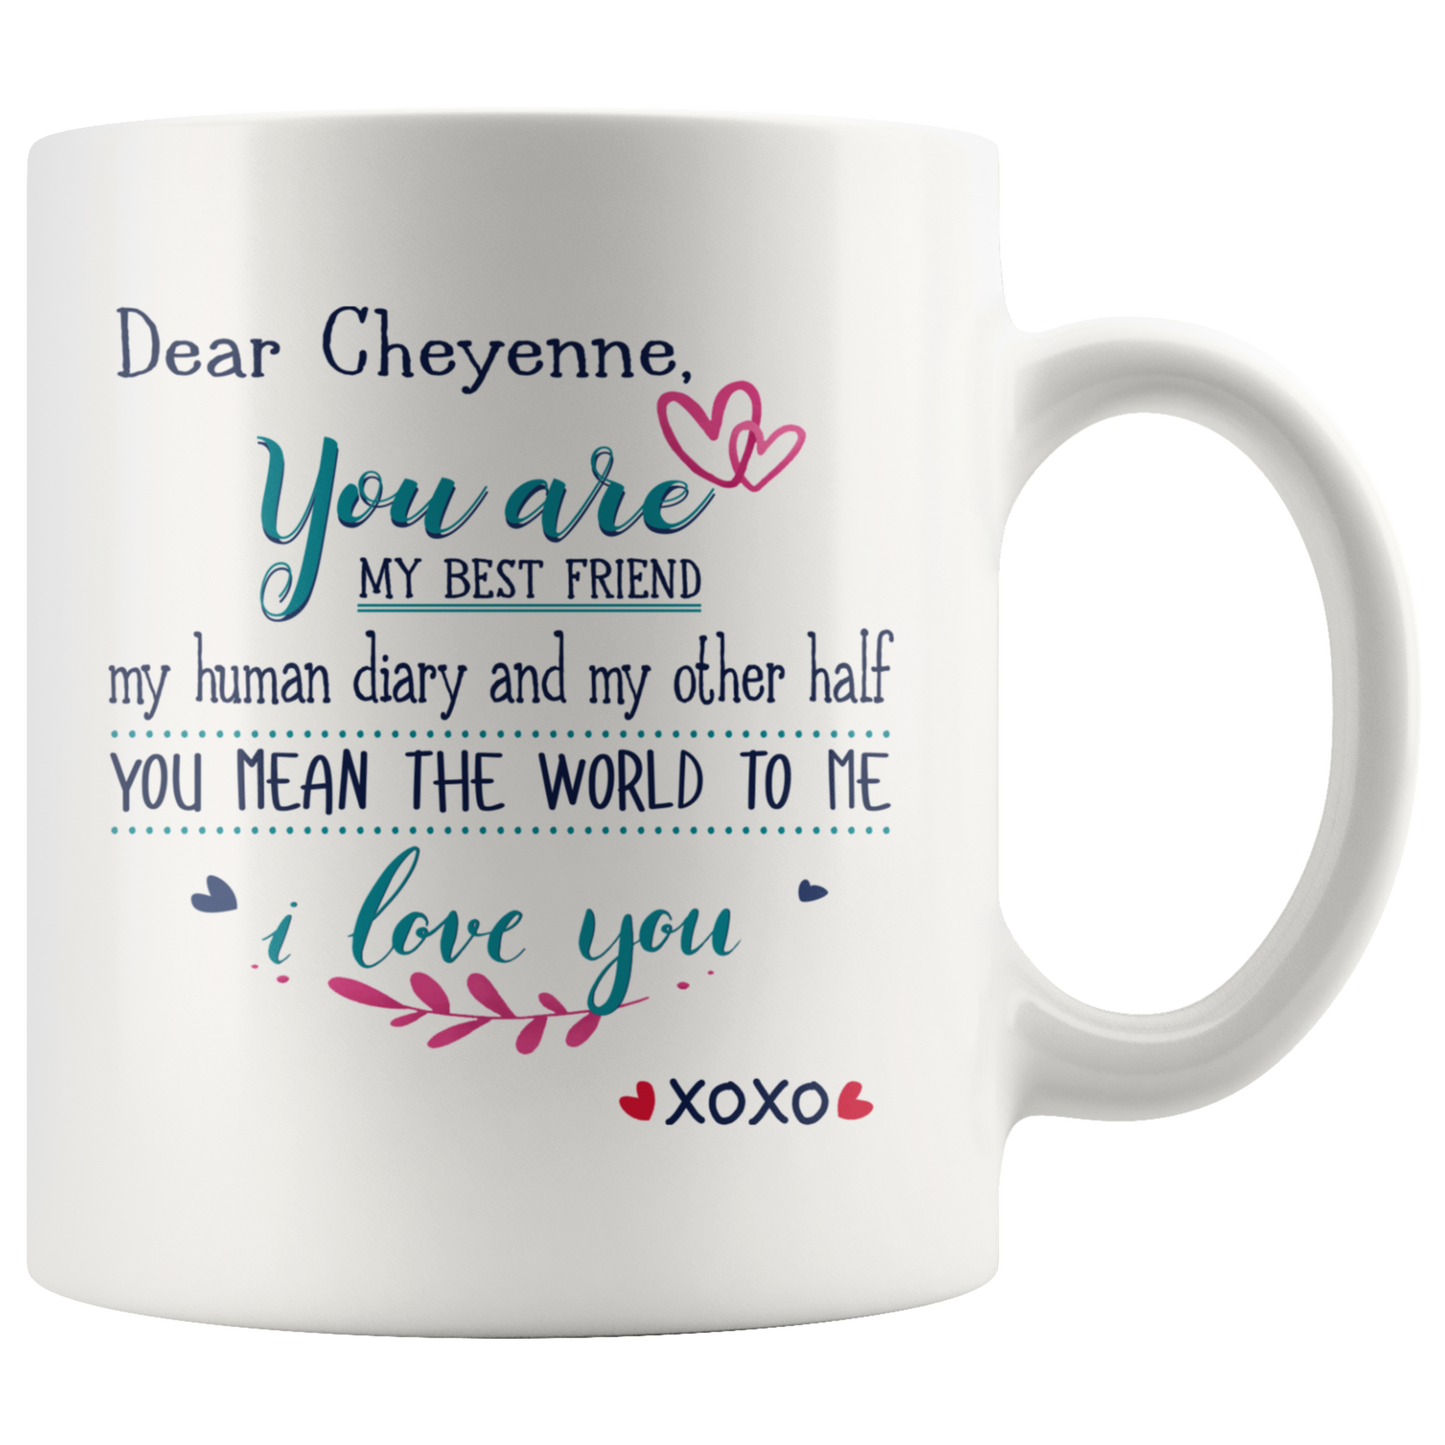 ND20452249-sp-16850 - Christmas Gifts For Wife From Husband Mug XoXo 11 oz - Dear